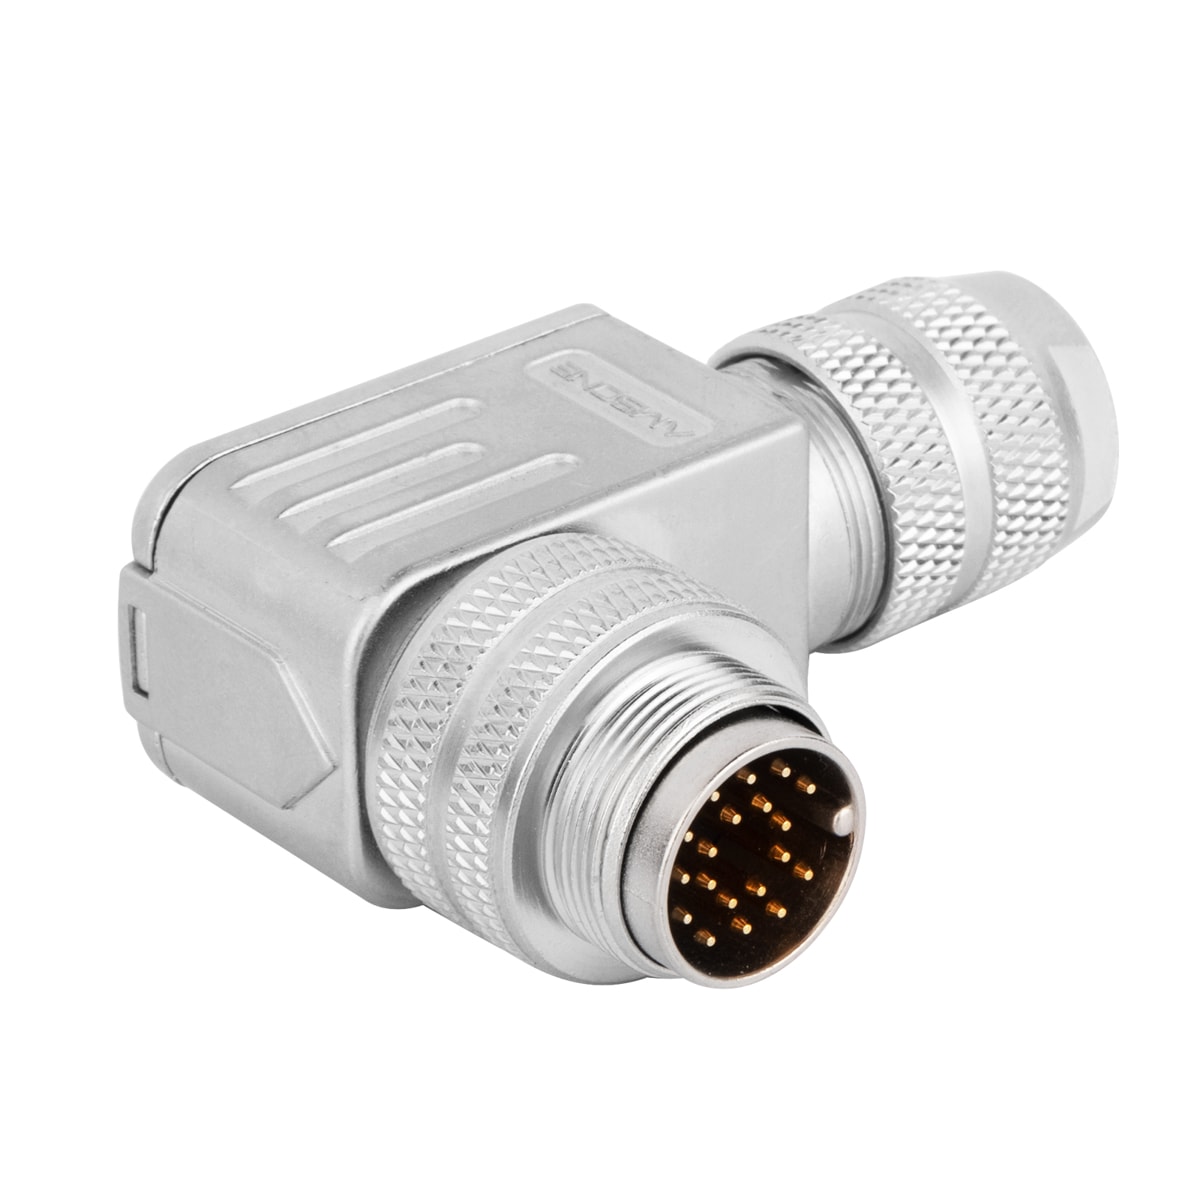 M16 cable connector, male, contacts:24, field assembly type, solder connection, right angled, IP67, UL certified